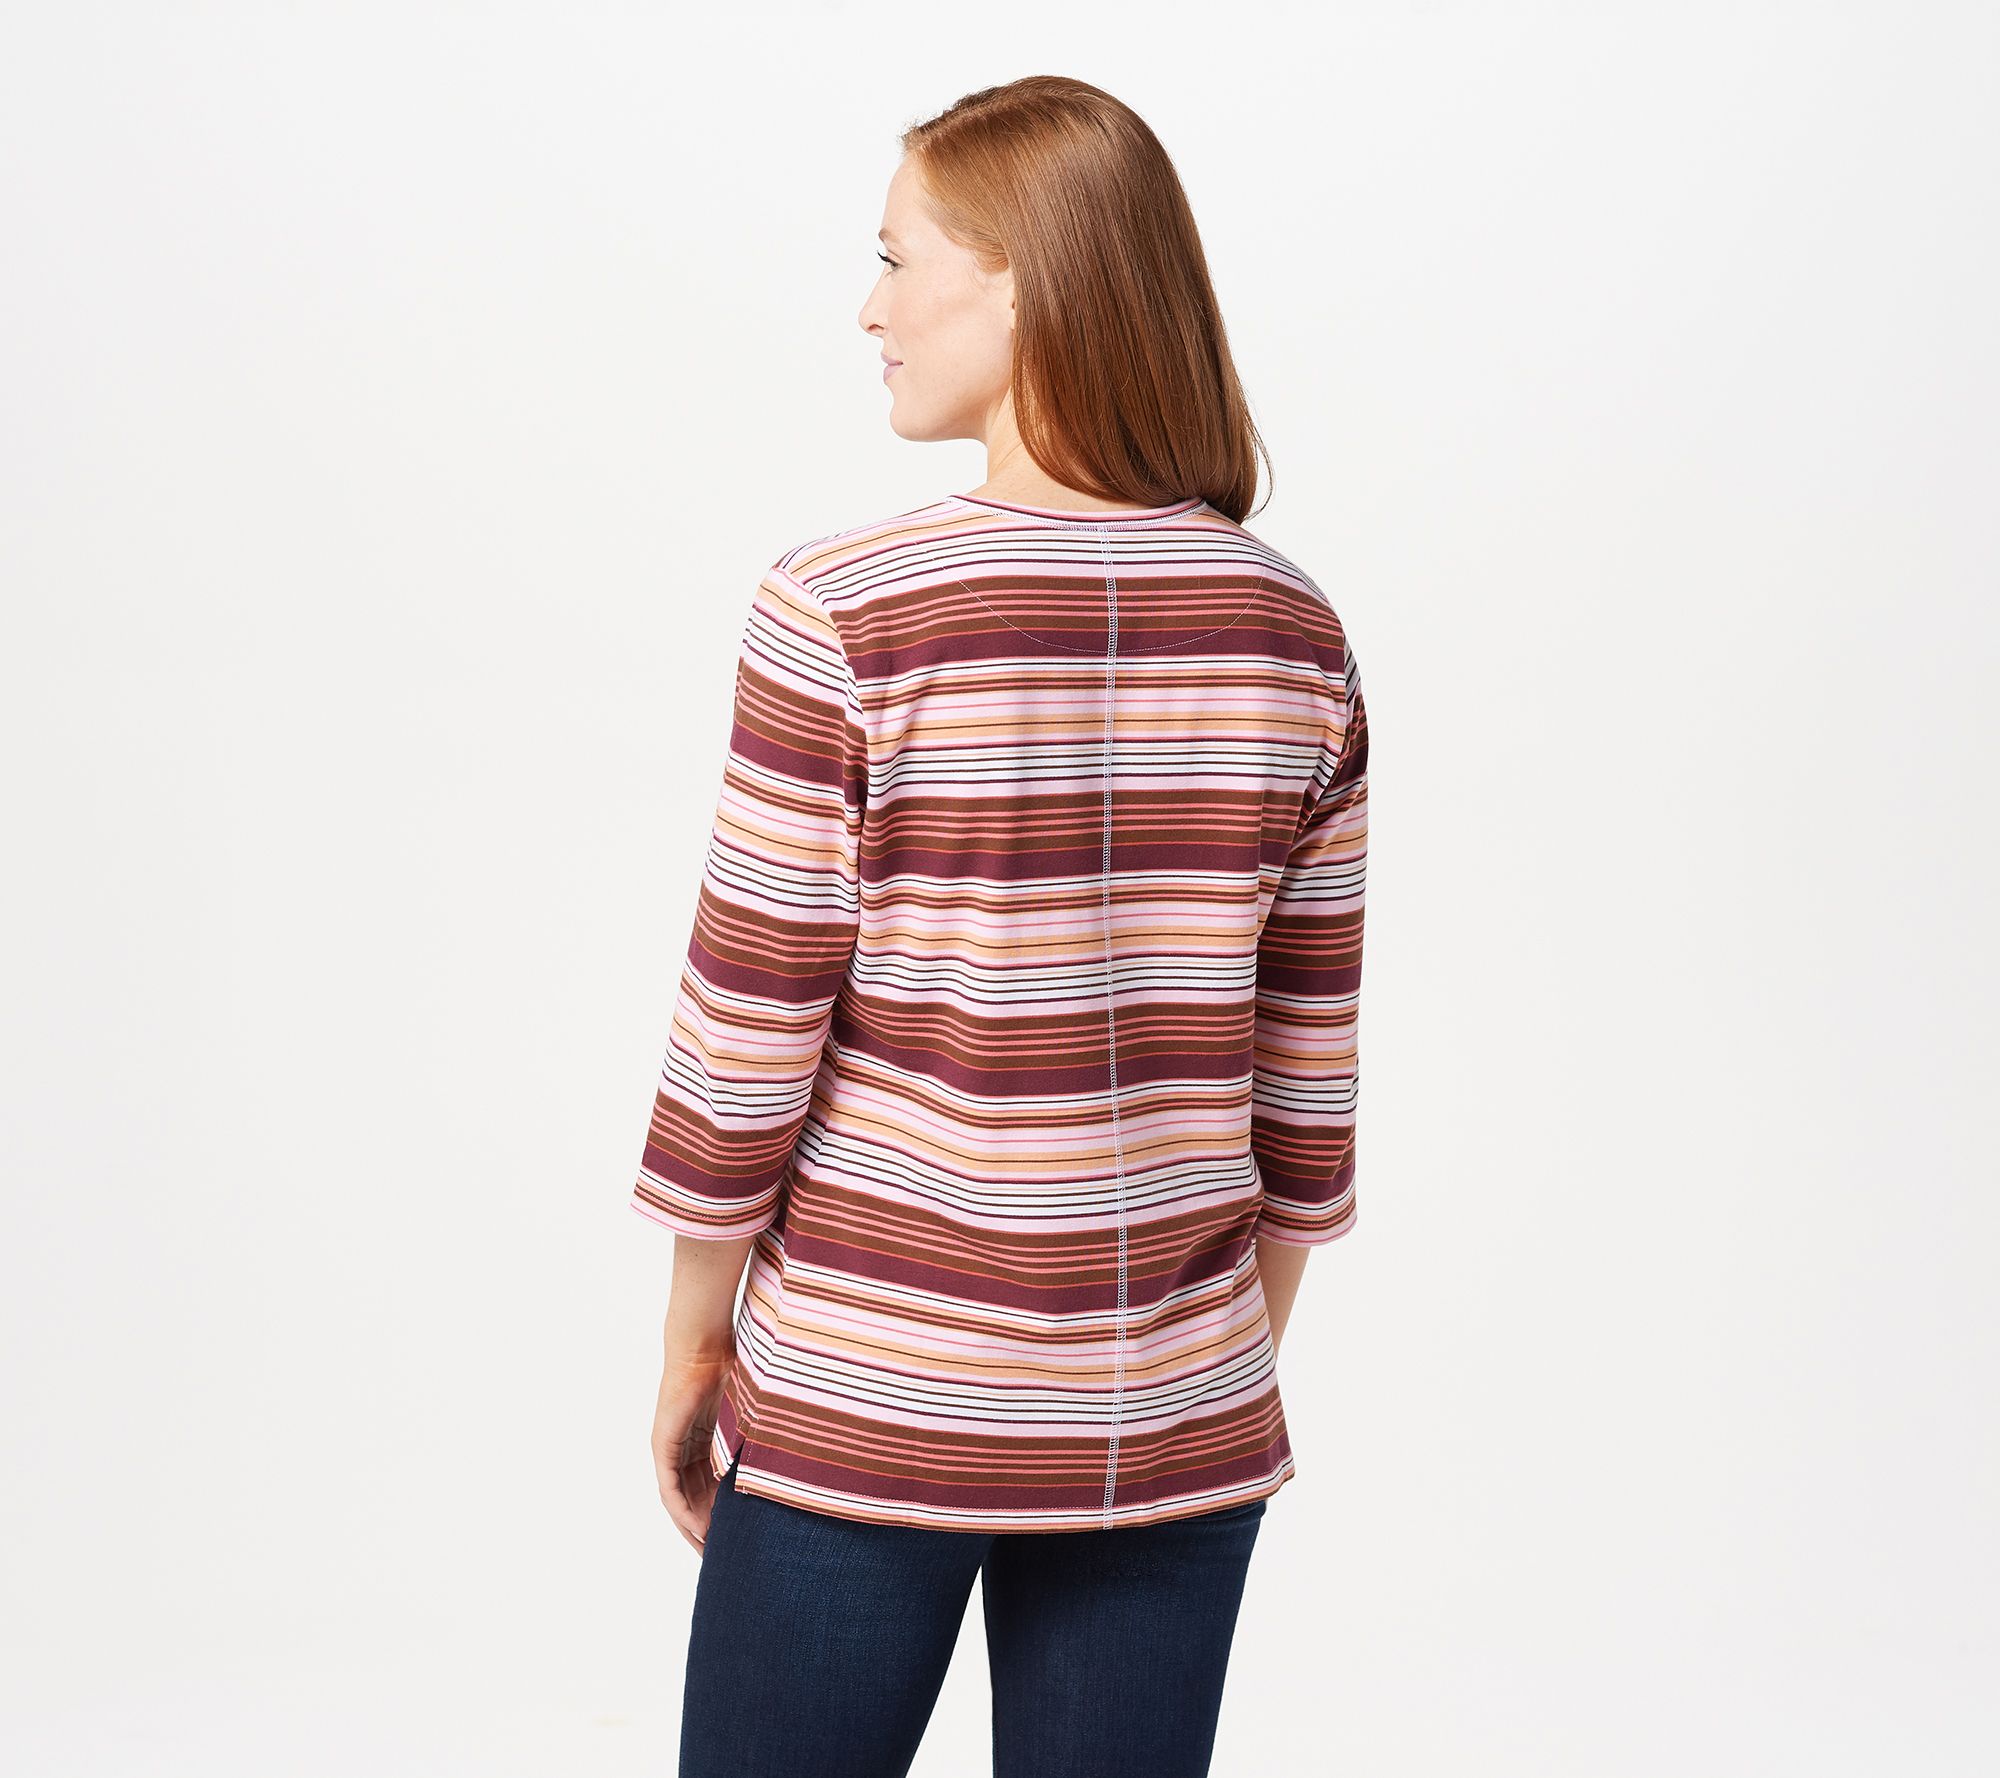 Denim & Co. Active Striped Printed Jersey Top with 3/4-Sleeve - QVC.com